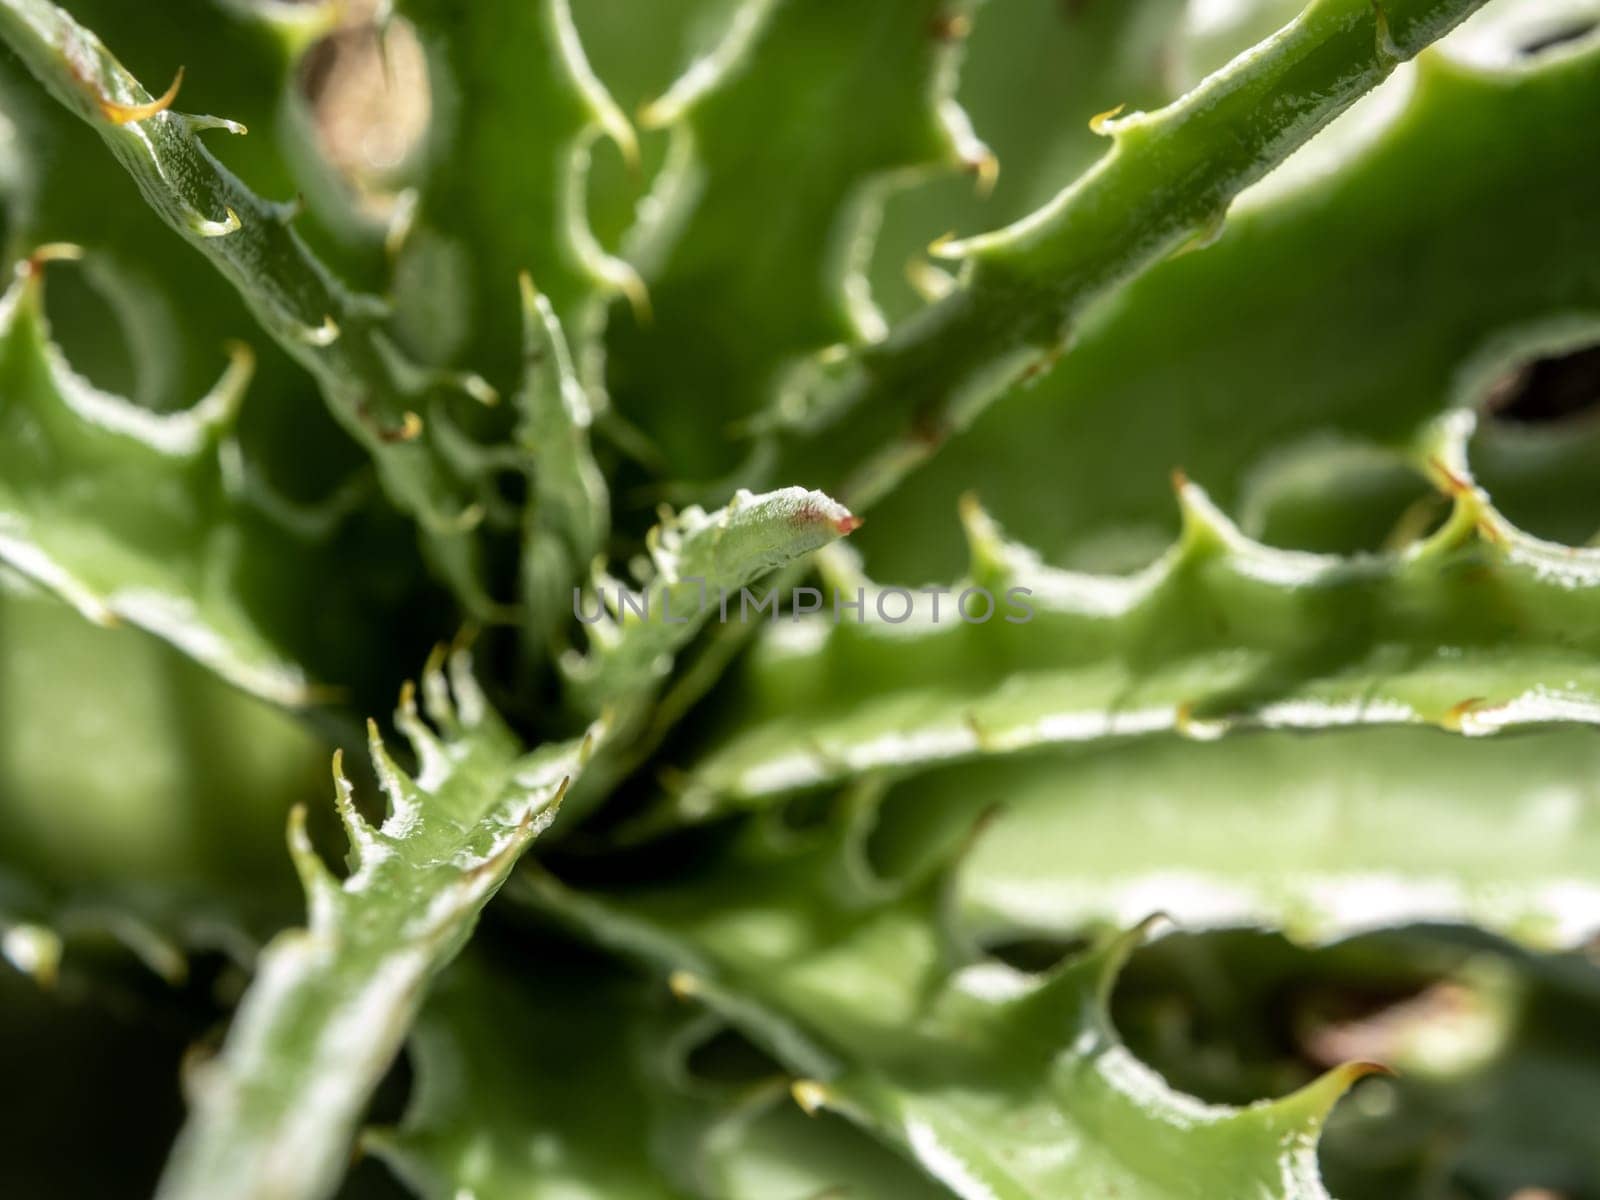 Succulent plant close-up, thorn and detail on leaves of Agave plant by Satakorn